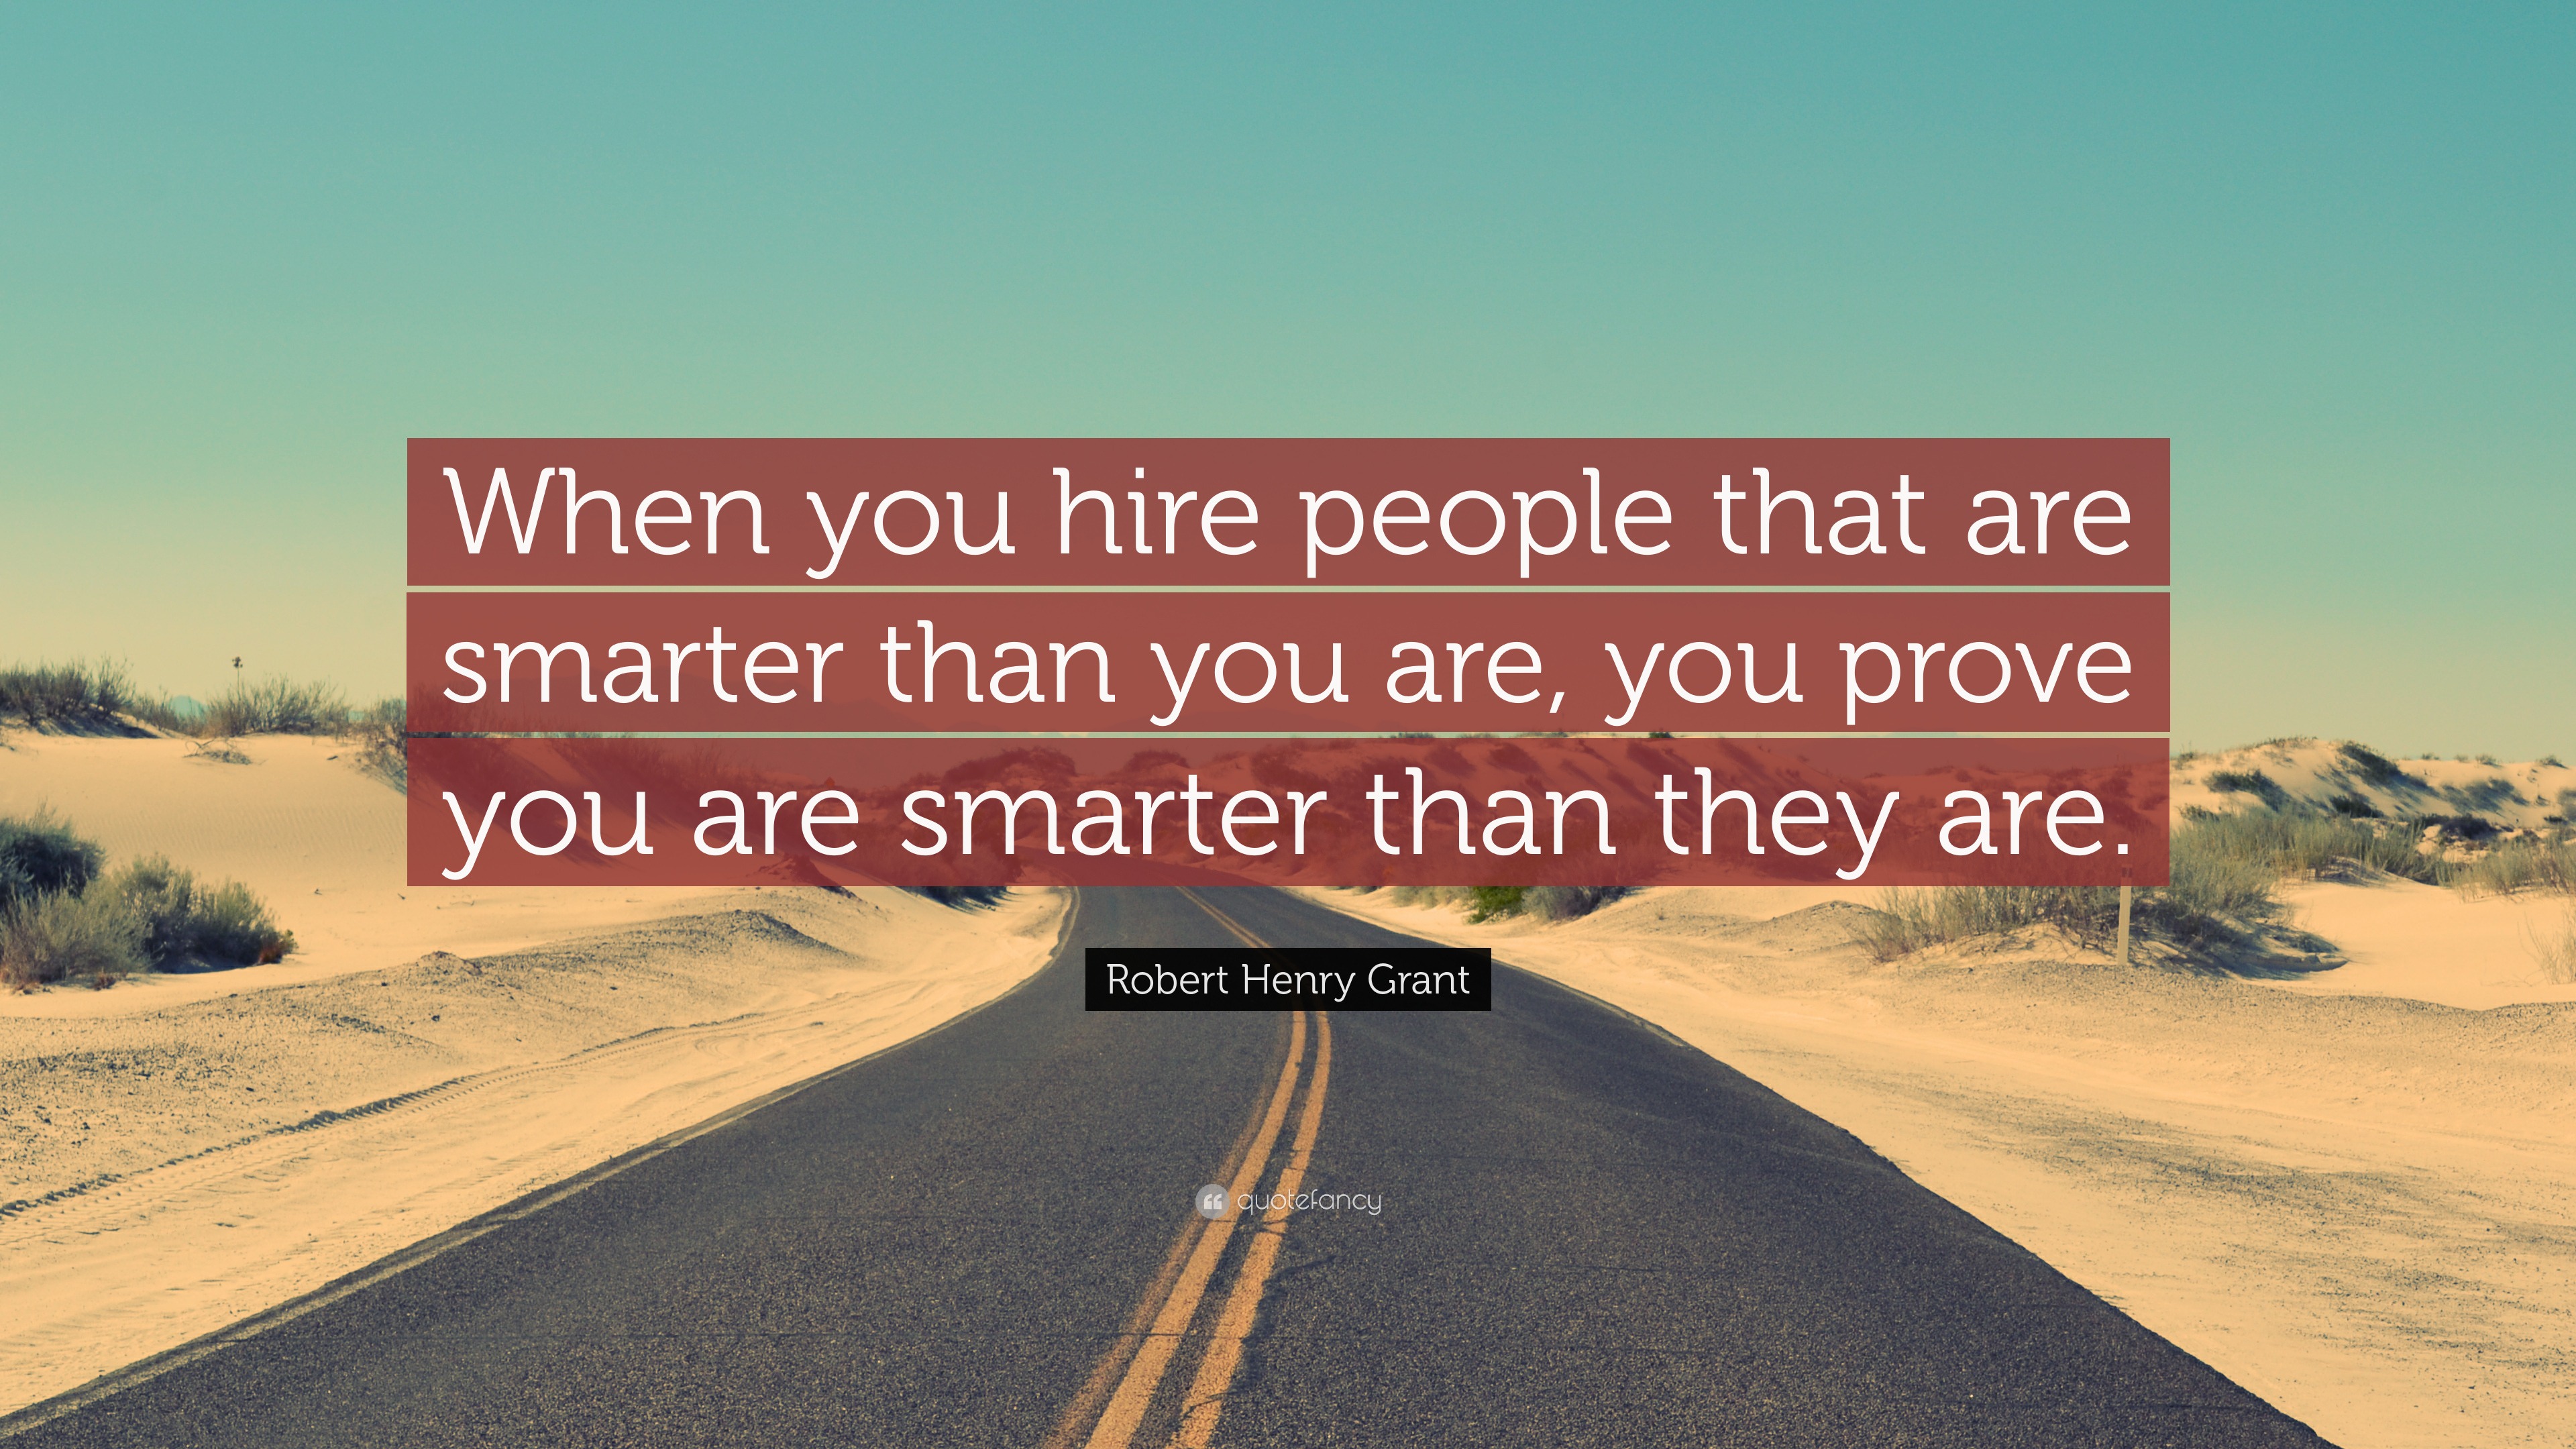 Robert Henry Grant Quote: “When you hire people that are smarter than you  are, you prove